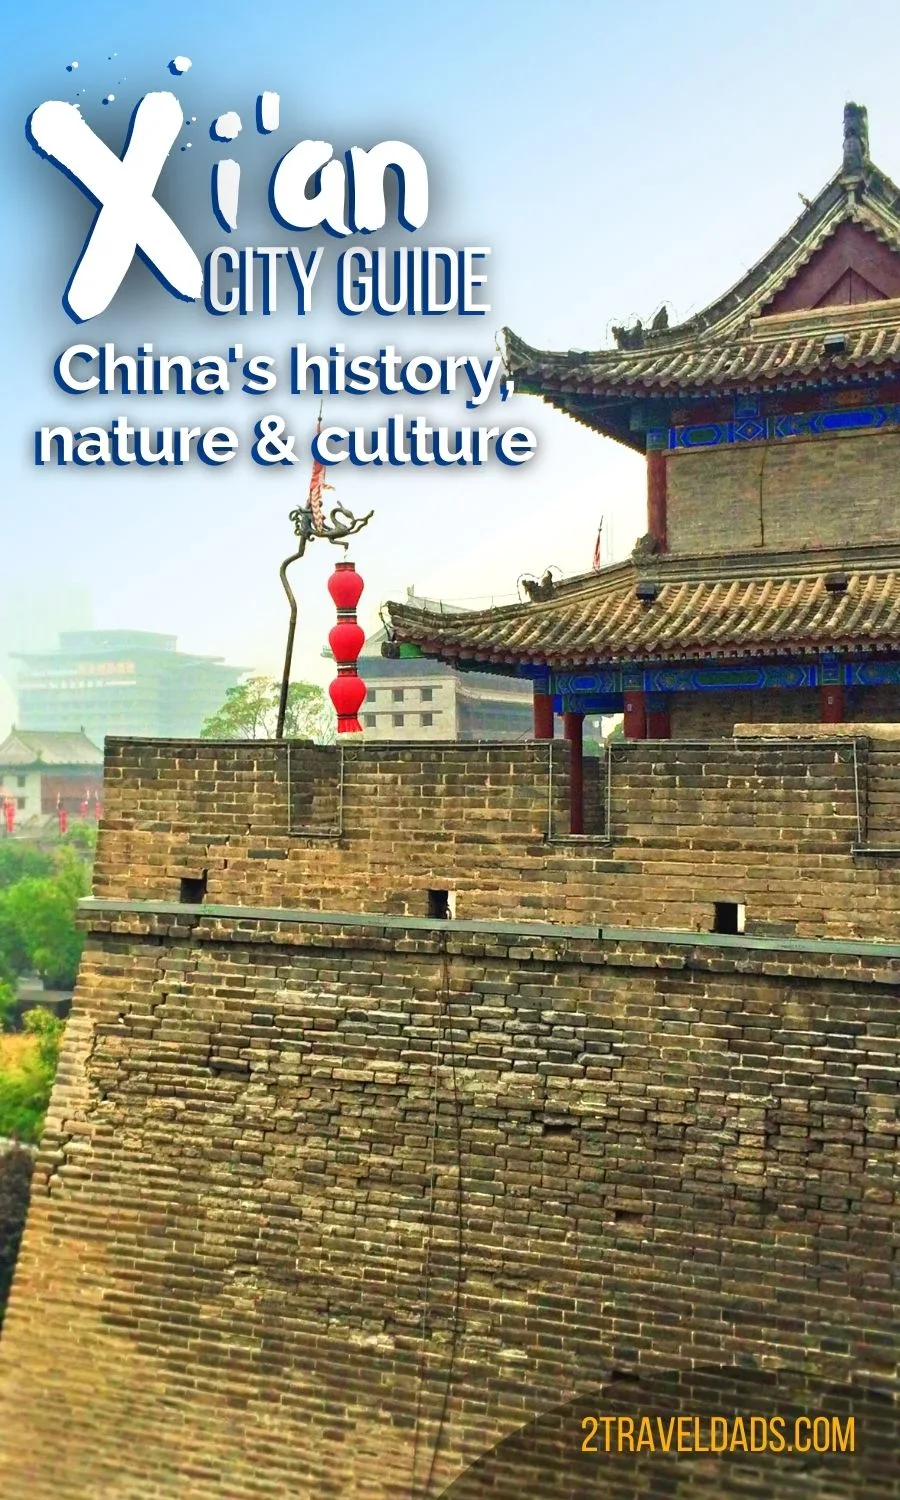 Xi'an city guide: how to experience China's first capitol with history, nature and culture. From museums to national parks, itinerary and travel tips for Xi'an. 2traveldads.com